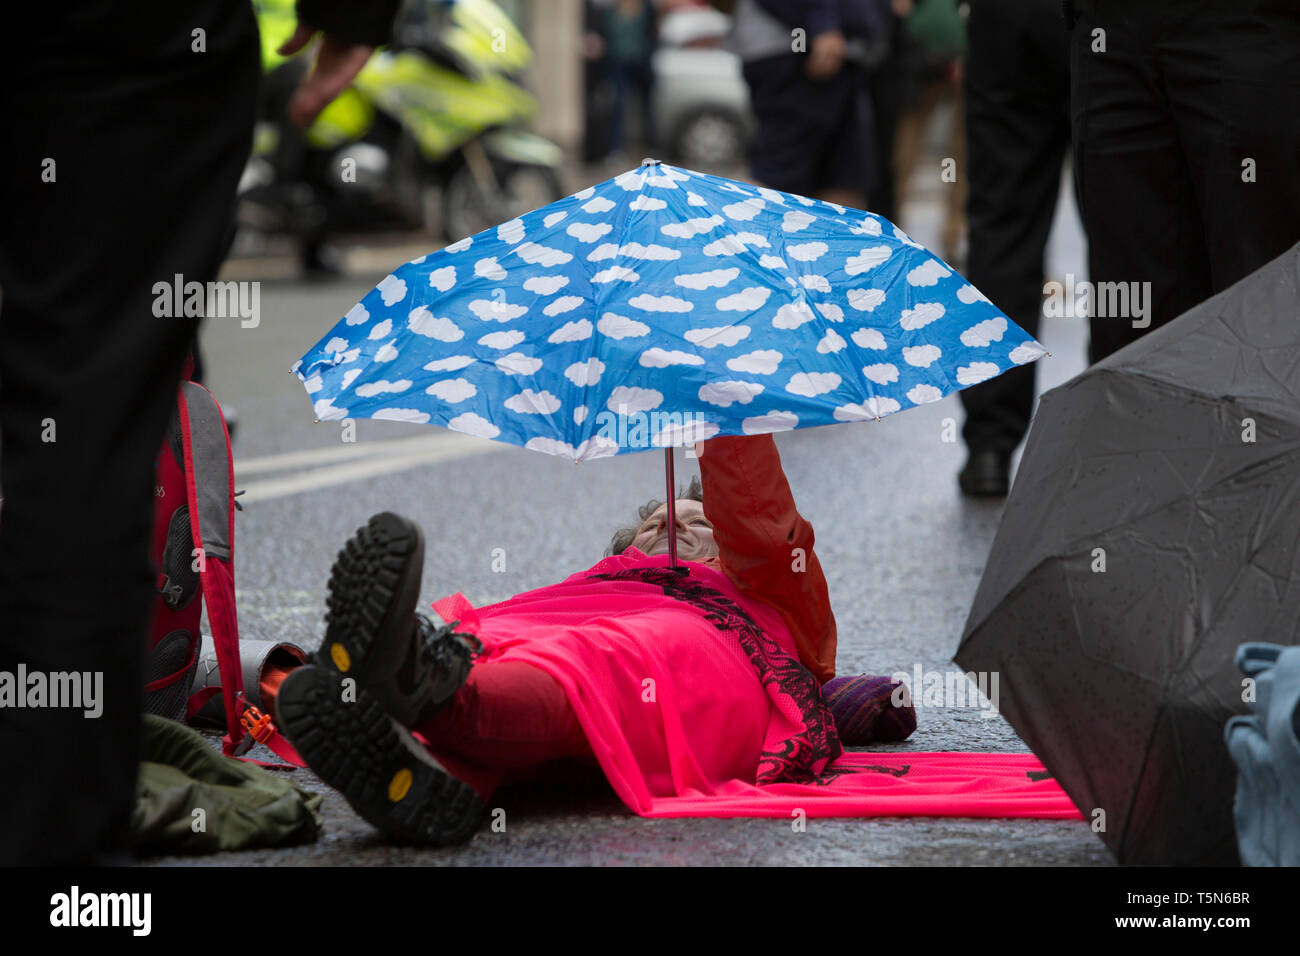 Environmental protesters chain themselves together and glue body parts to the road in Fleet Street on the 11th and final day of protests, road-blockages and arrests across London by the climate change campaign Extinction Rebellion, on 25th April 2019, in London, England. Stock Photo